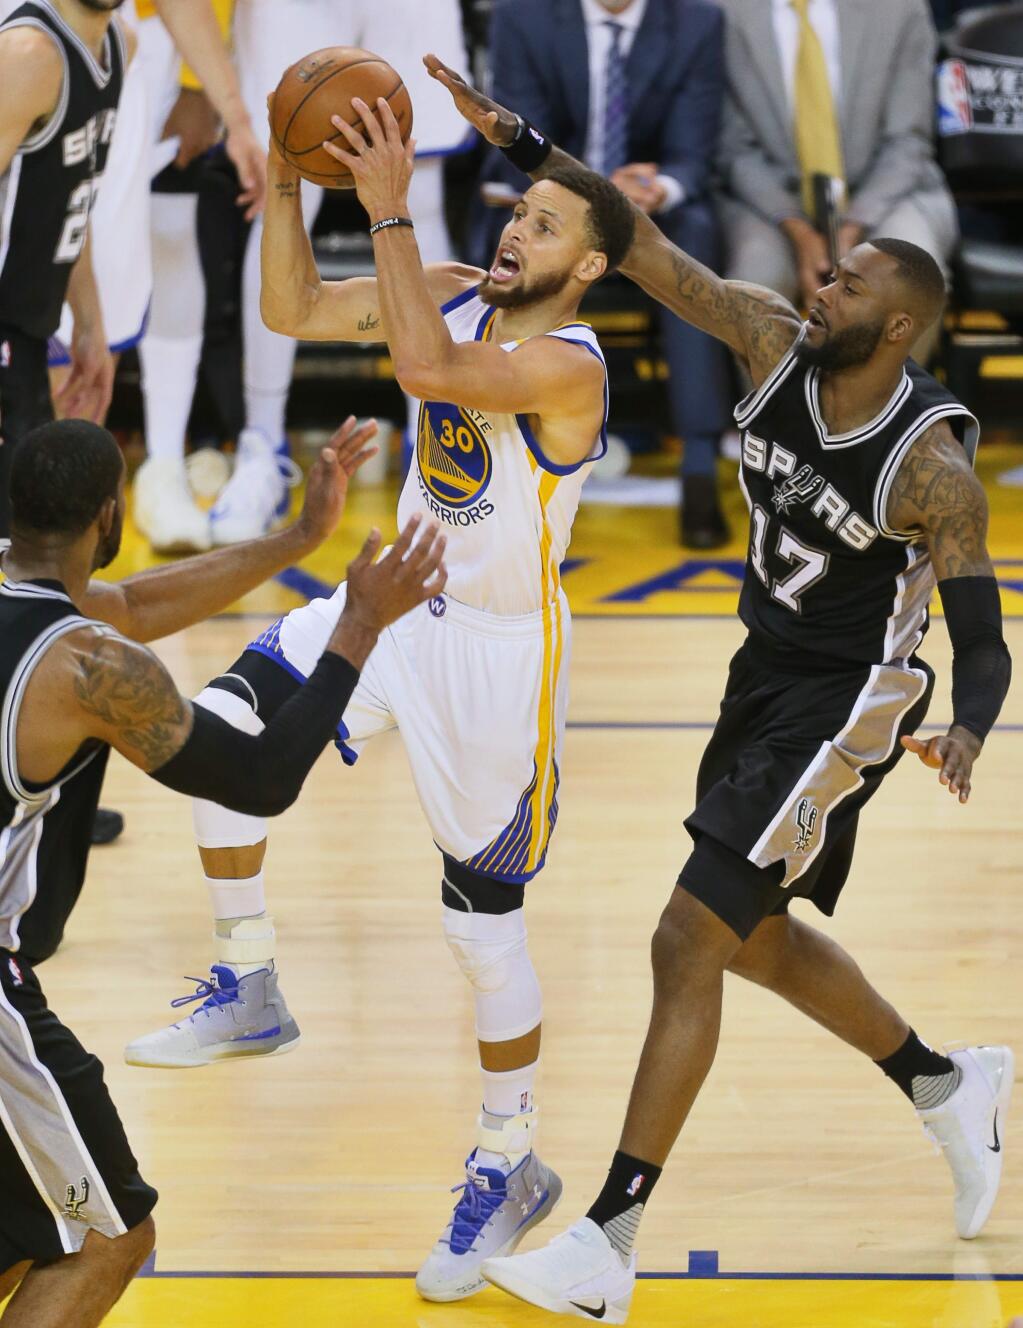 Golden State Warriors guard Stephen Curry goes up for s layup against San Antonio Spurs guard Jonathon Simmons, during game 1 of the NBA Western Conference Finals in Oakland on Sunday, May 14, 2017. The Warriors defeated the Spurs 113-111.(Christopher Chung/ The Press Democrat)